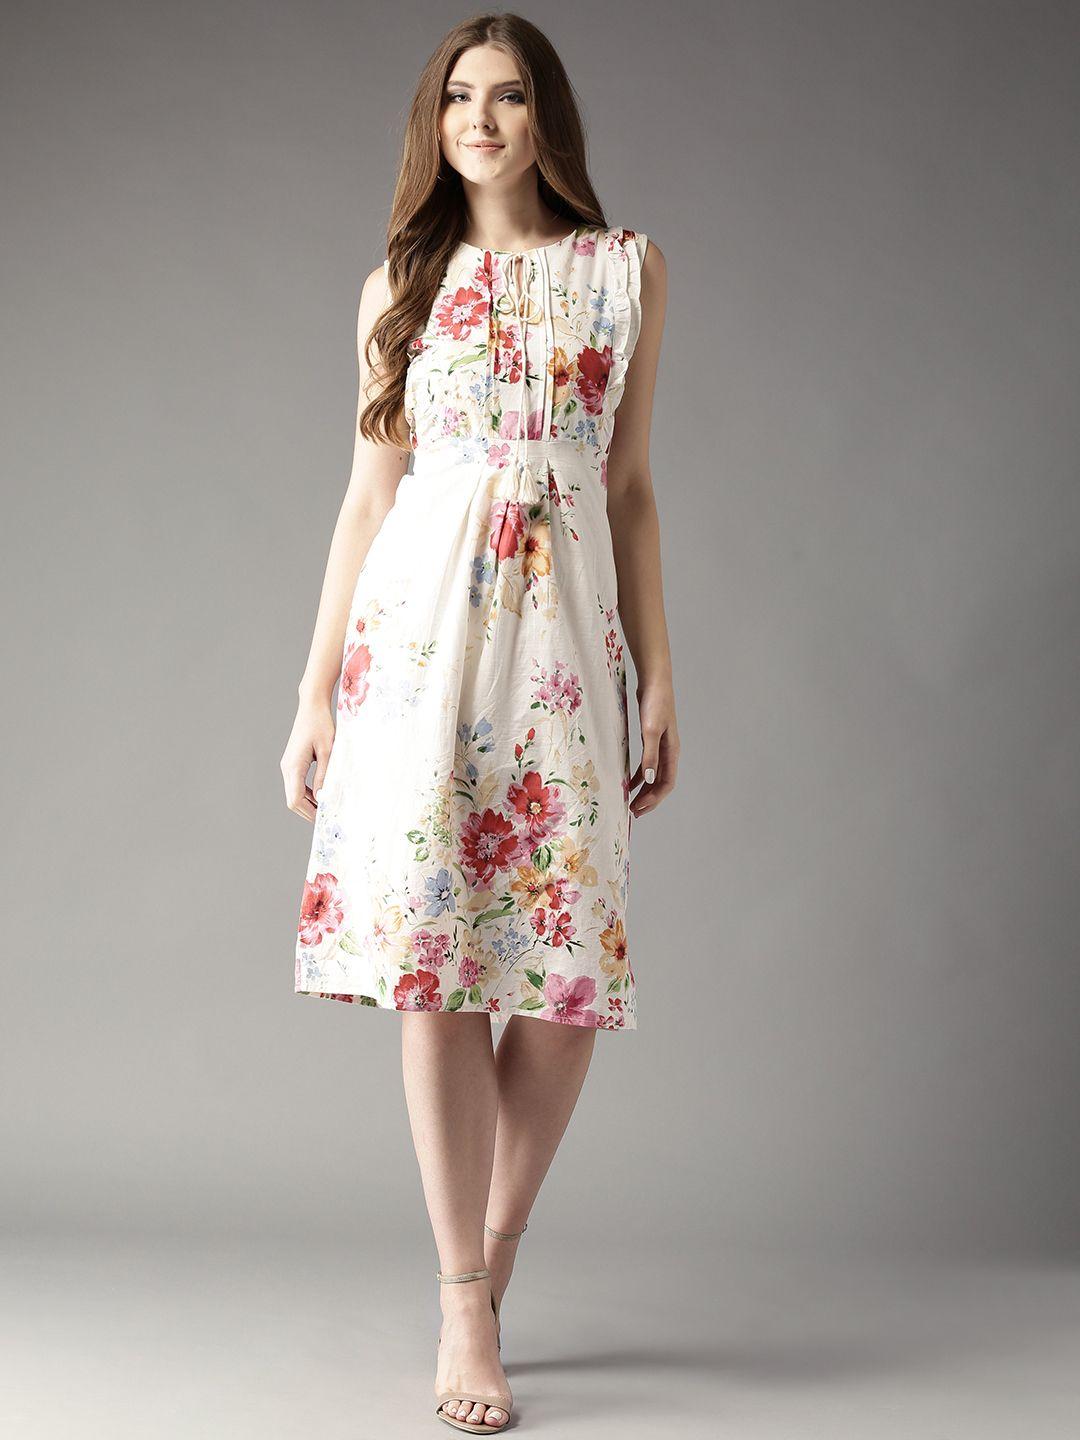 here&now white & pink lightweight cotton floral print fit & flare dress